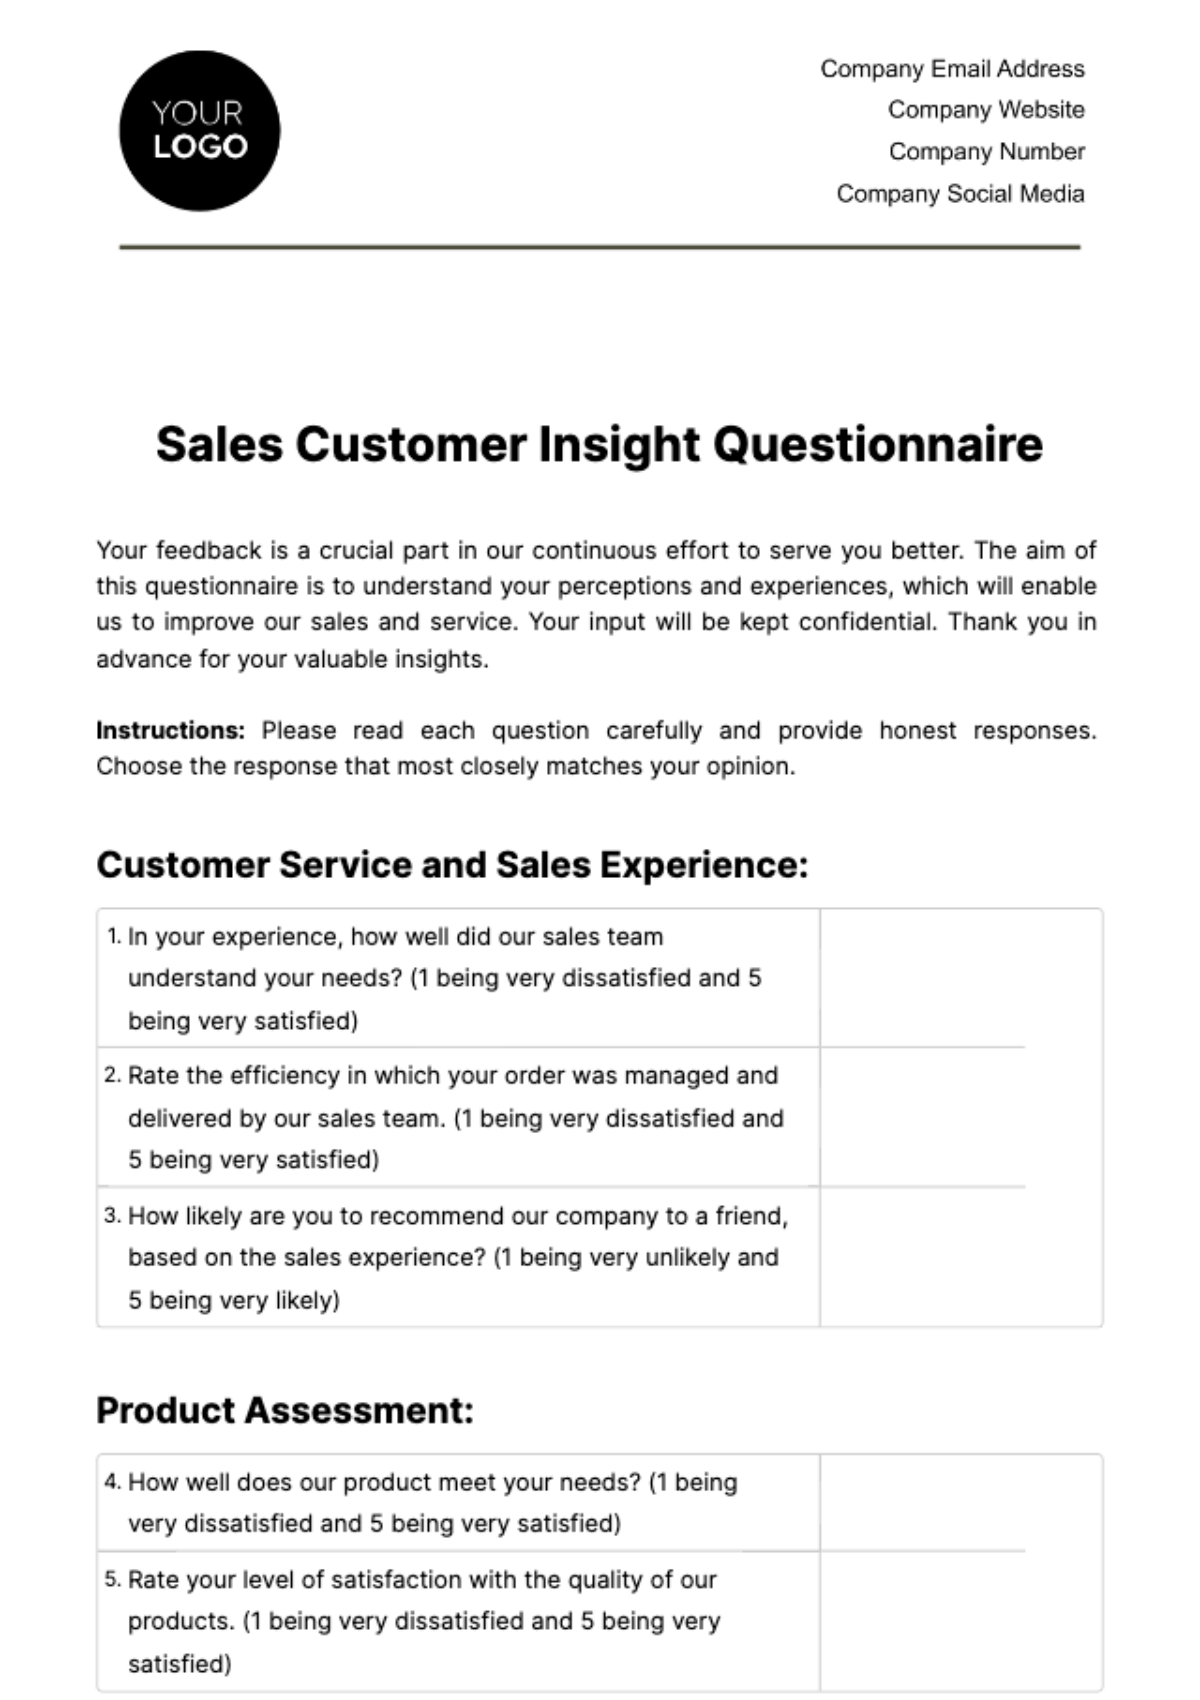 Free Sales Customer Insight Questionnaire Template